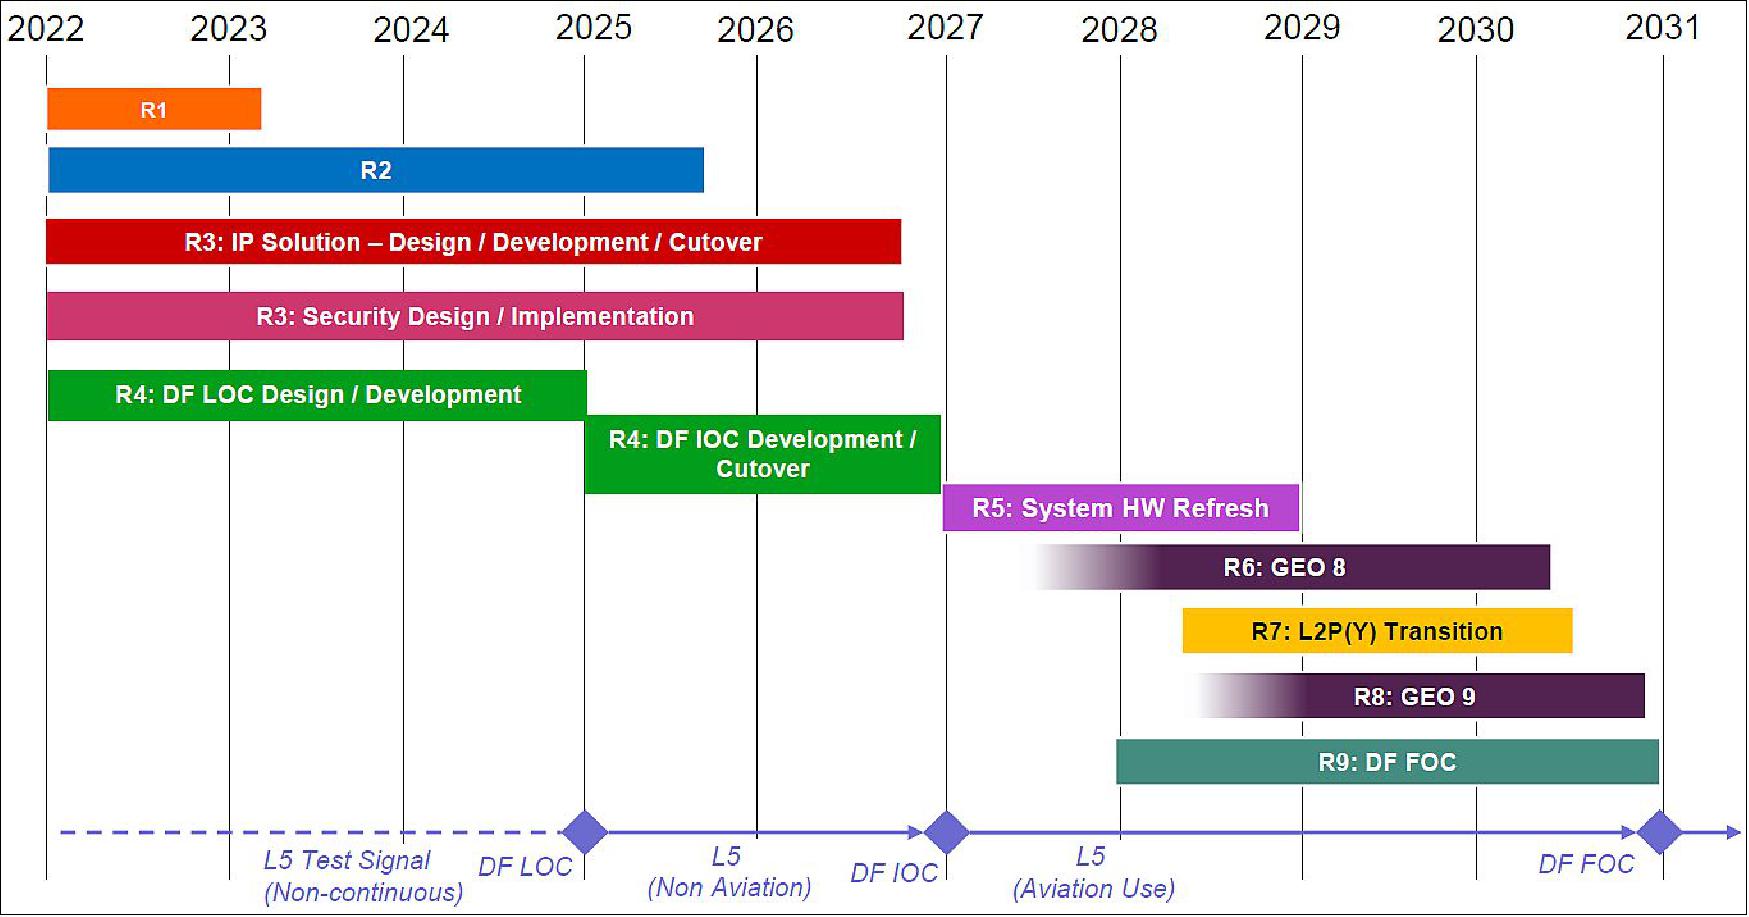 Figure 10: Phase 4B Release timeframe (image credit: FAA)